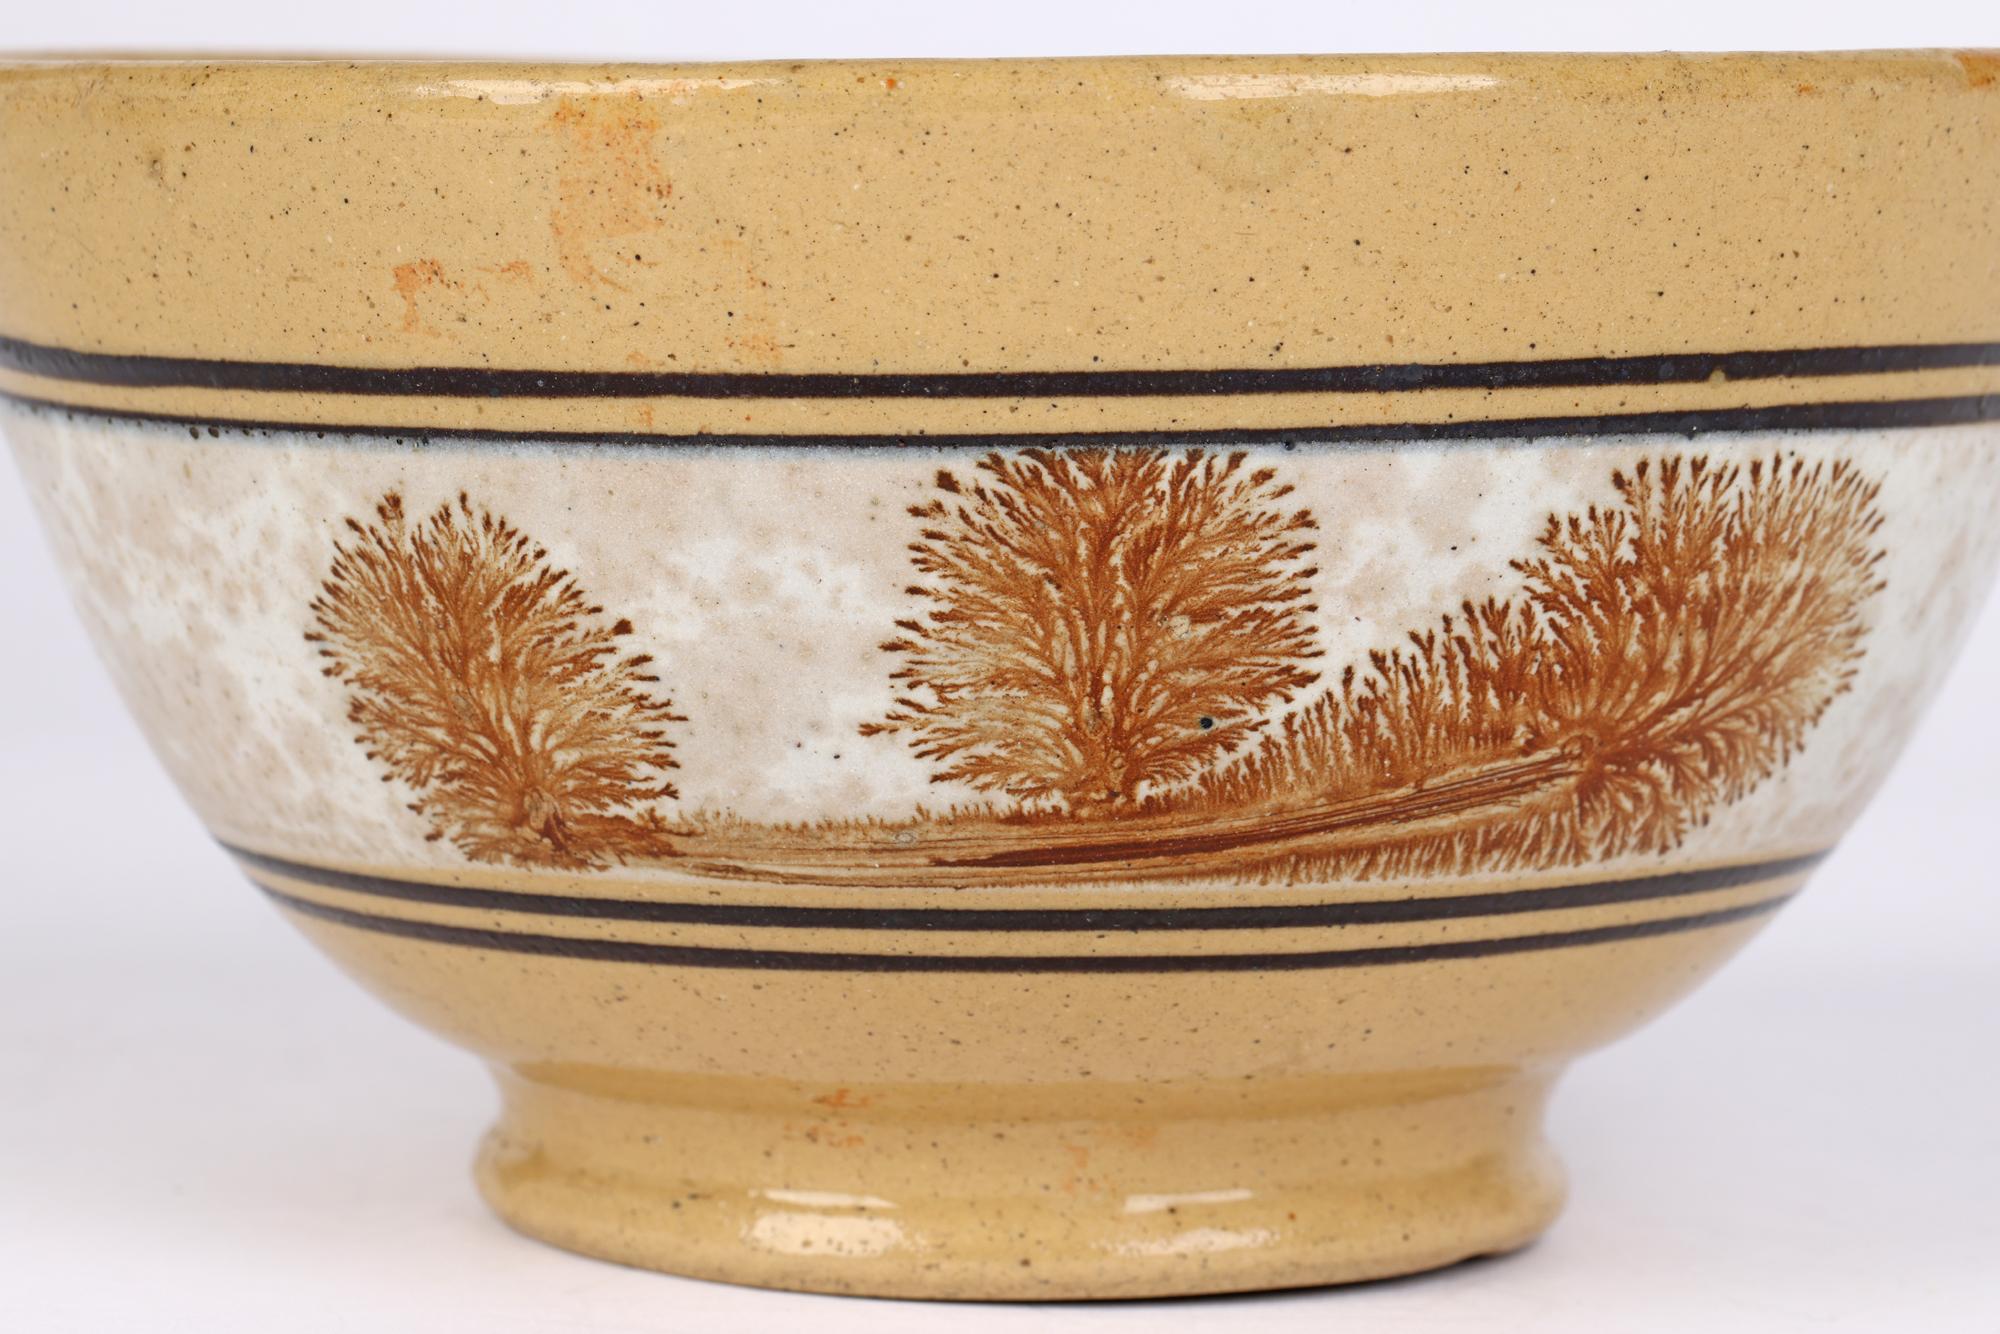 A good and highly collectable antique mocha ware earthenware pottery bowl the body decorated with a band with black slip border and a white slip ground with brown brushed landscape patterns in typical mochaware style dating to the early 19th